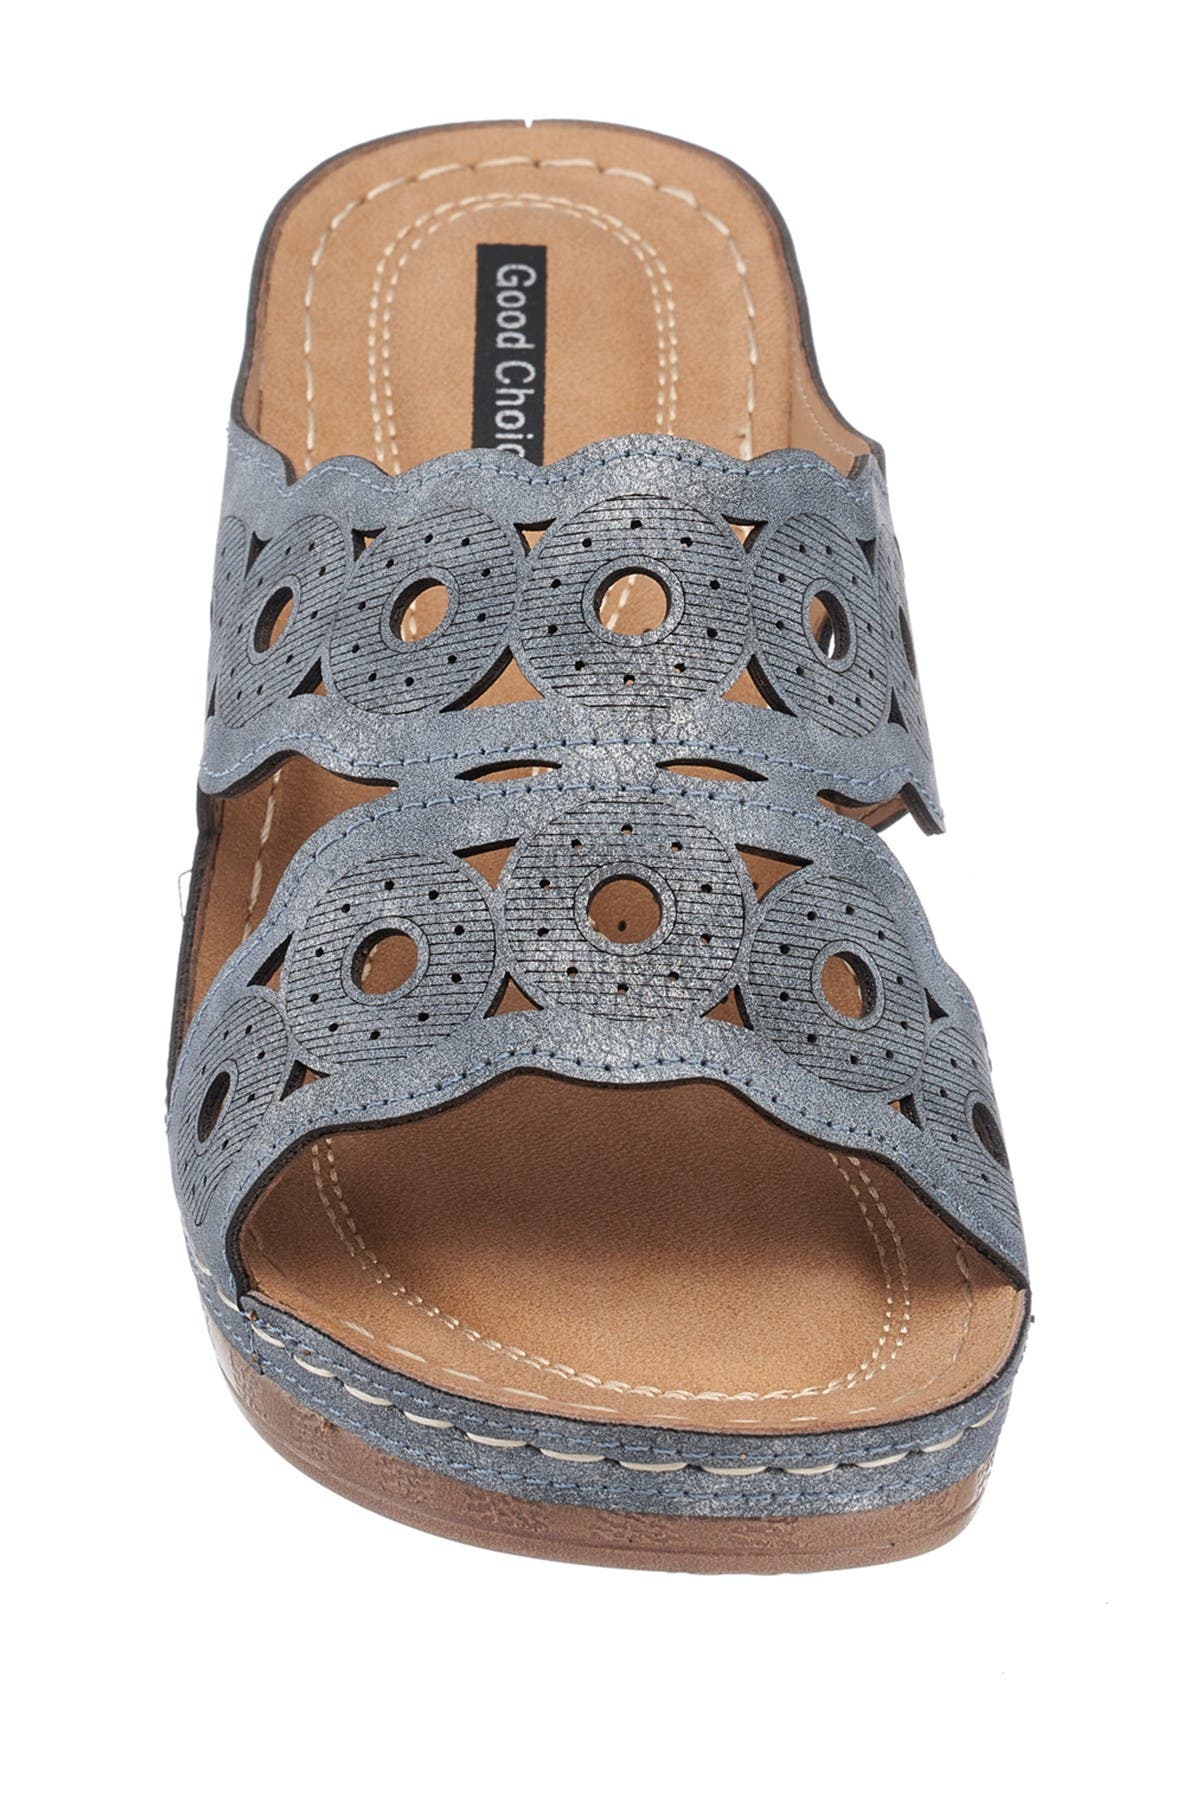 Good Choice New York April Wedge Sandal In Pewter